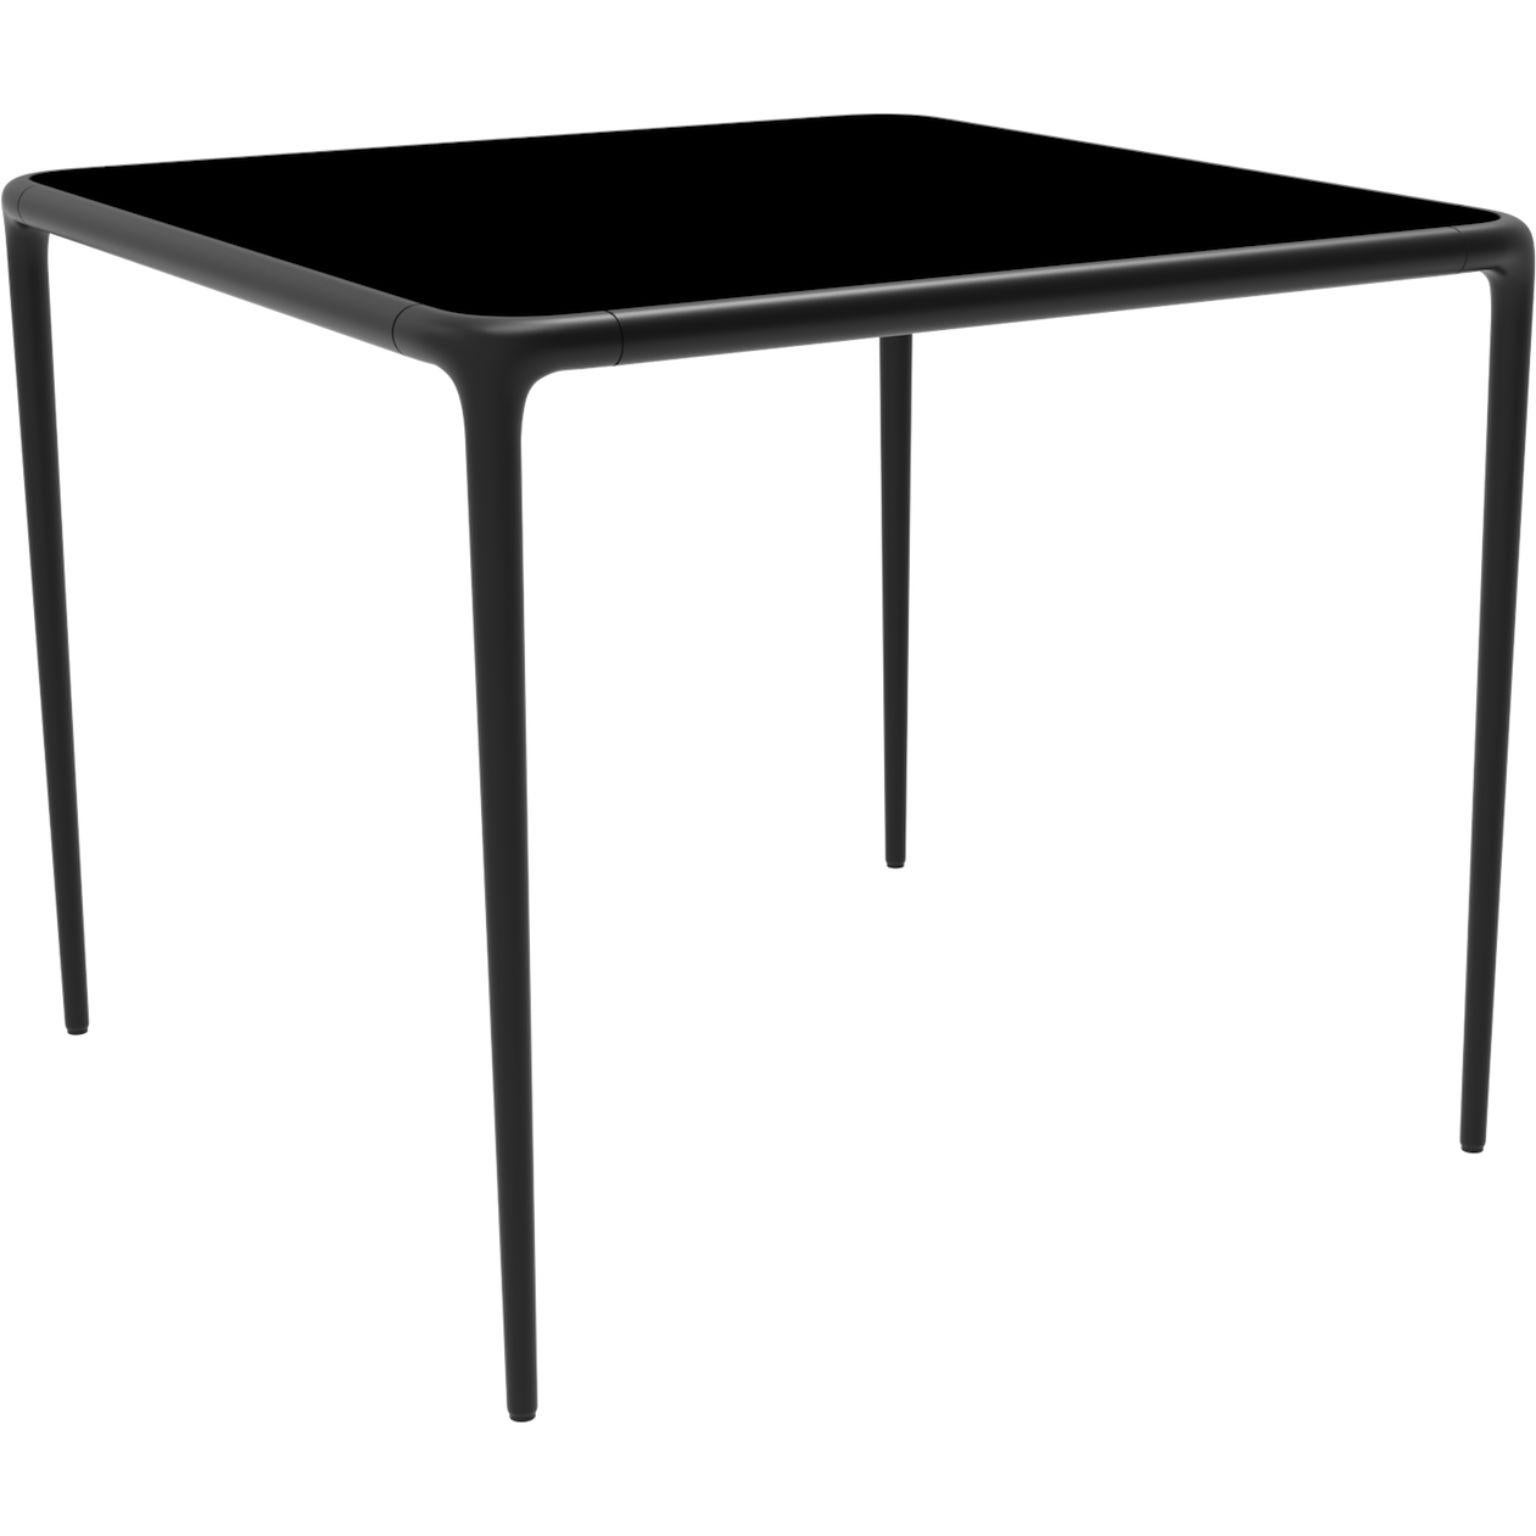 Xaloc black glass top table 90 by Mowee.
Dimensions: D90 x W90 x H74 cm.
Material: Aluminum, tinted tempered glass top.
Also available in different aluminum colors and finishes (HPL Black Edge or Neolith). 

 Xaloc synthesizes the lines of